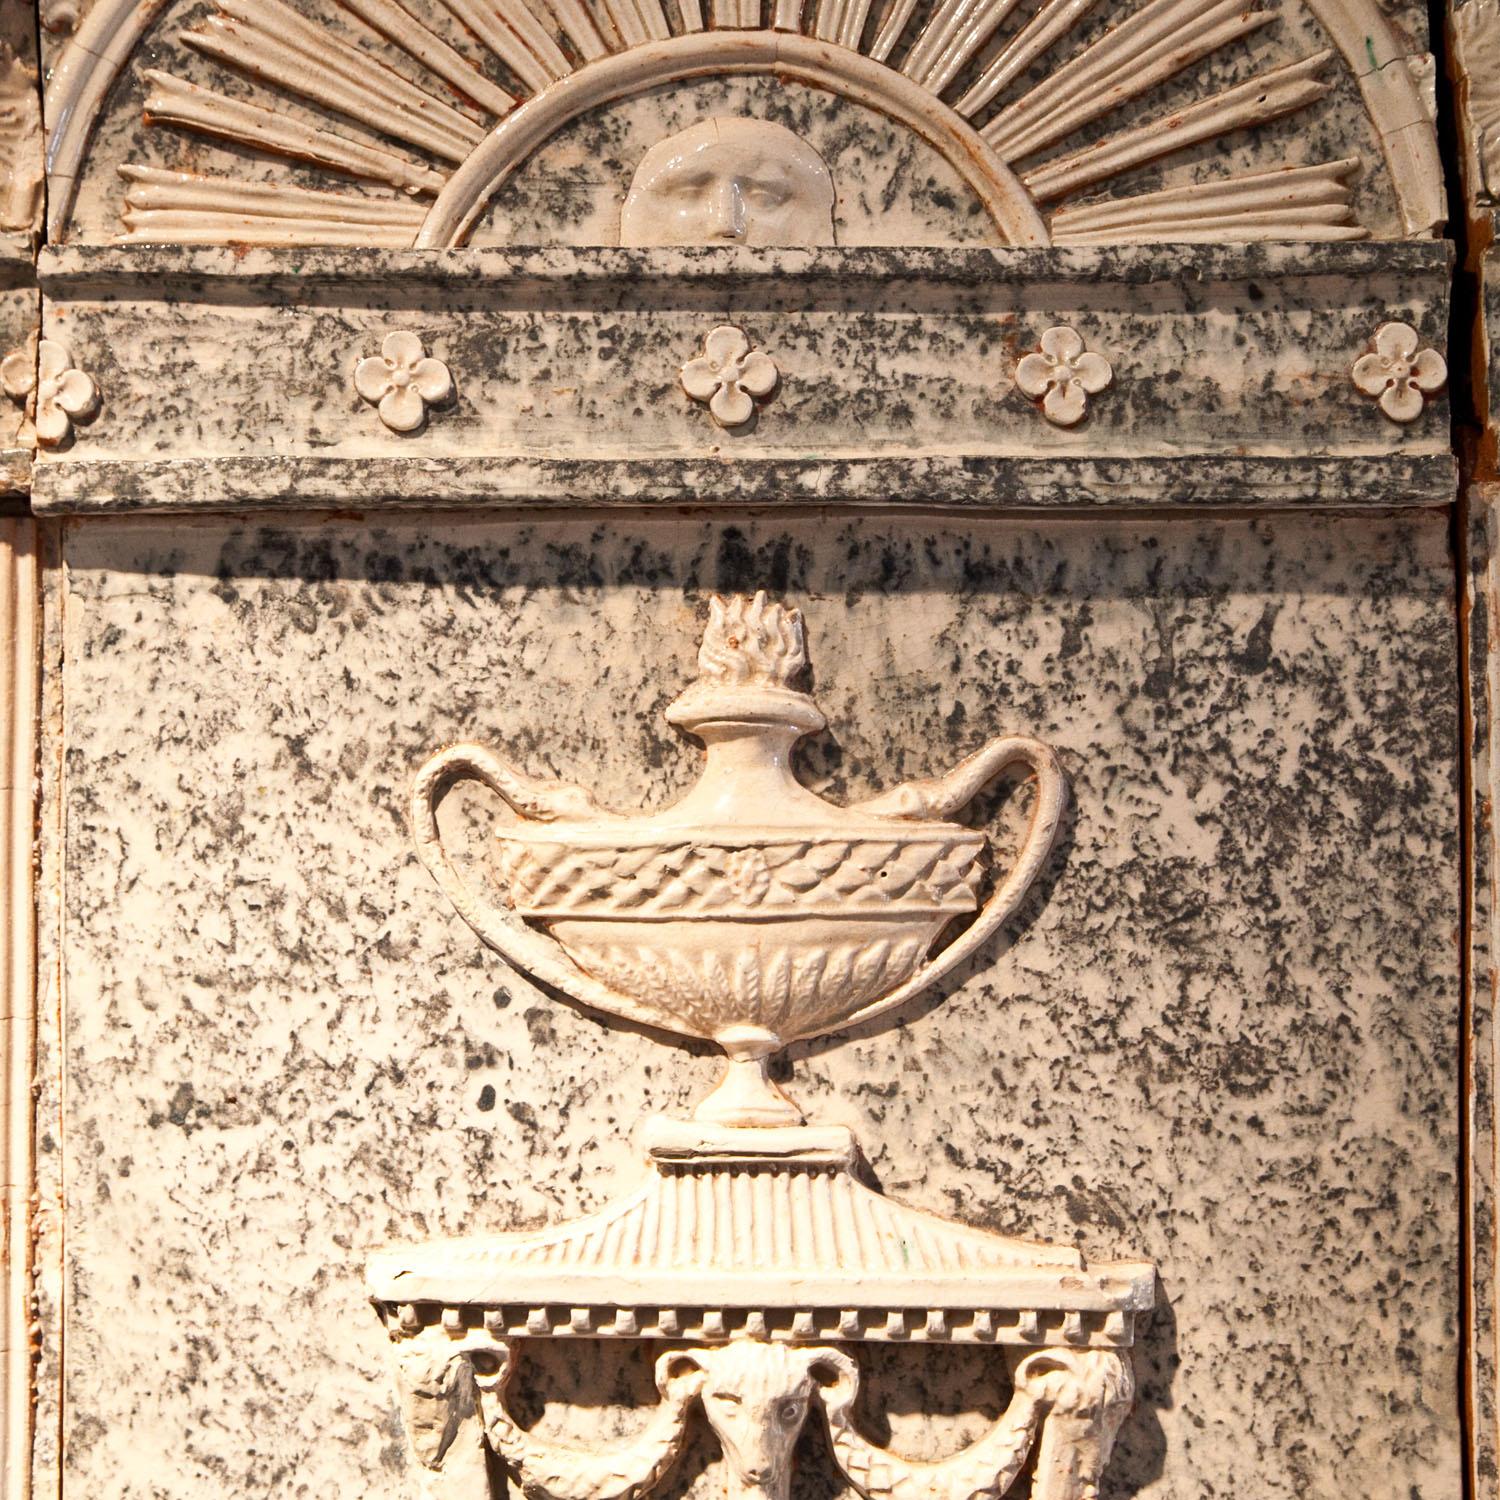 Neoclassical Tiled Stove, Prob. Austria, 1st Third of the 19th Century (Neoklassisch)